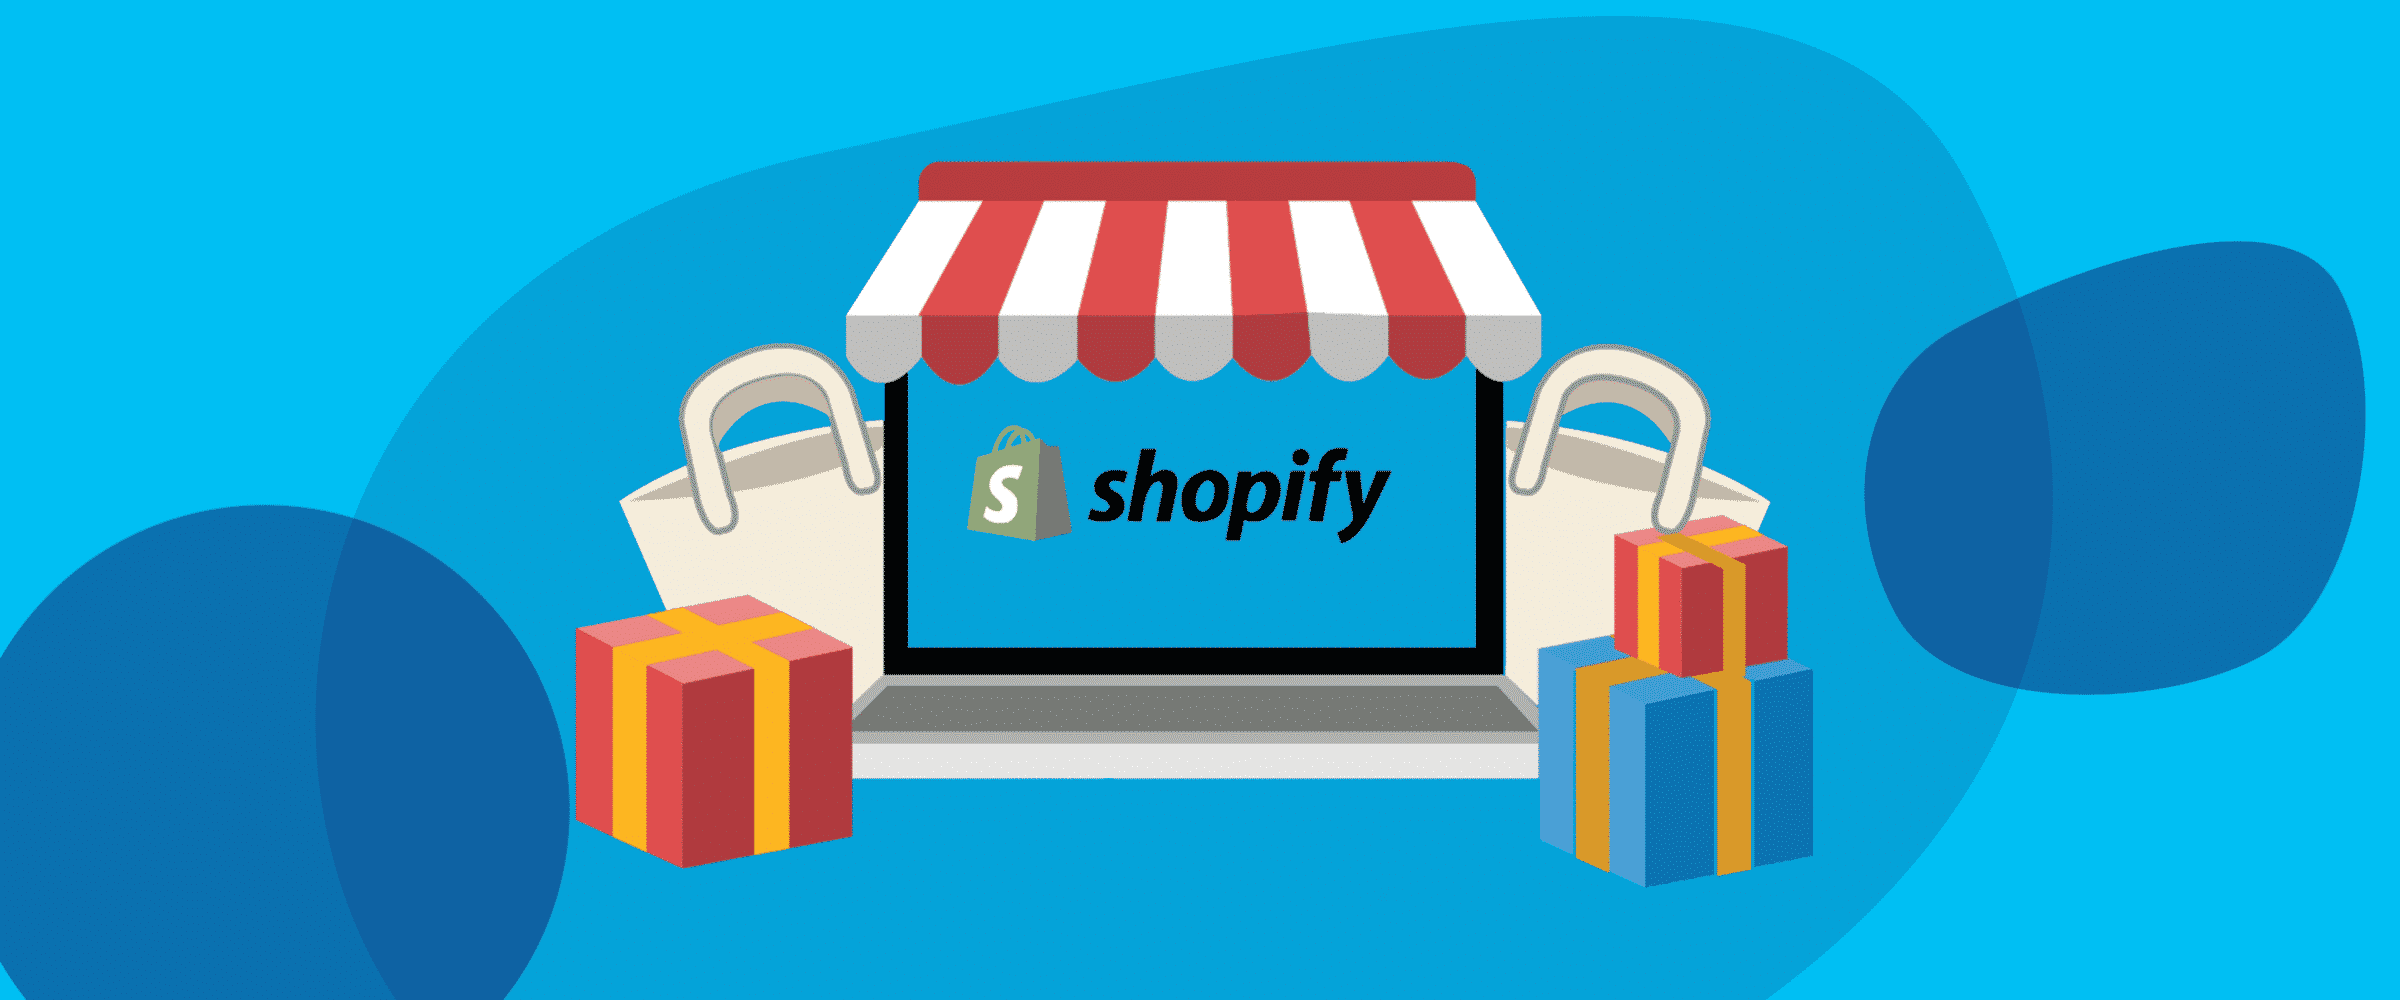 6 Tactics to Improve your Shopify Store's Digital Ads